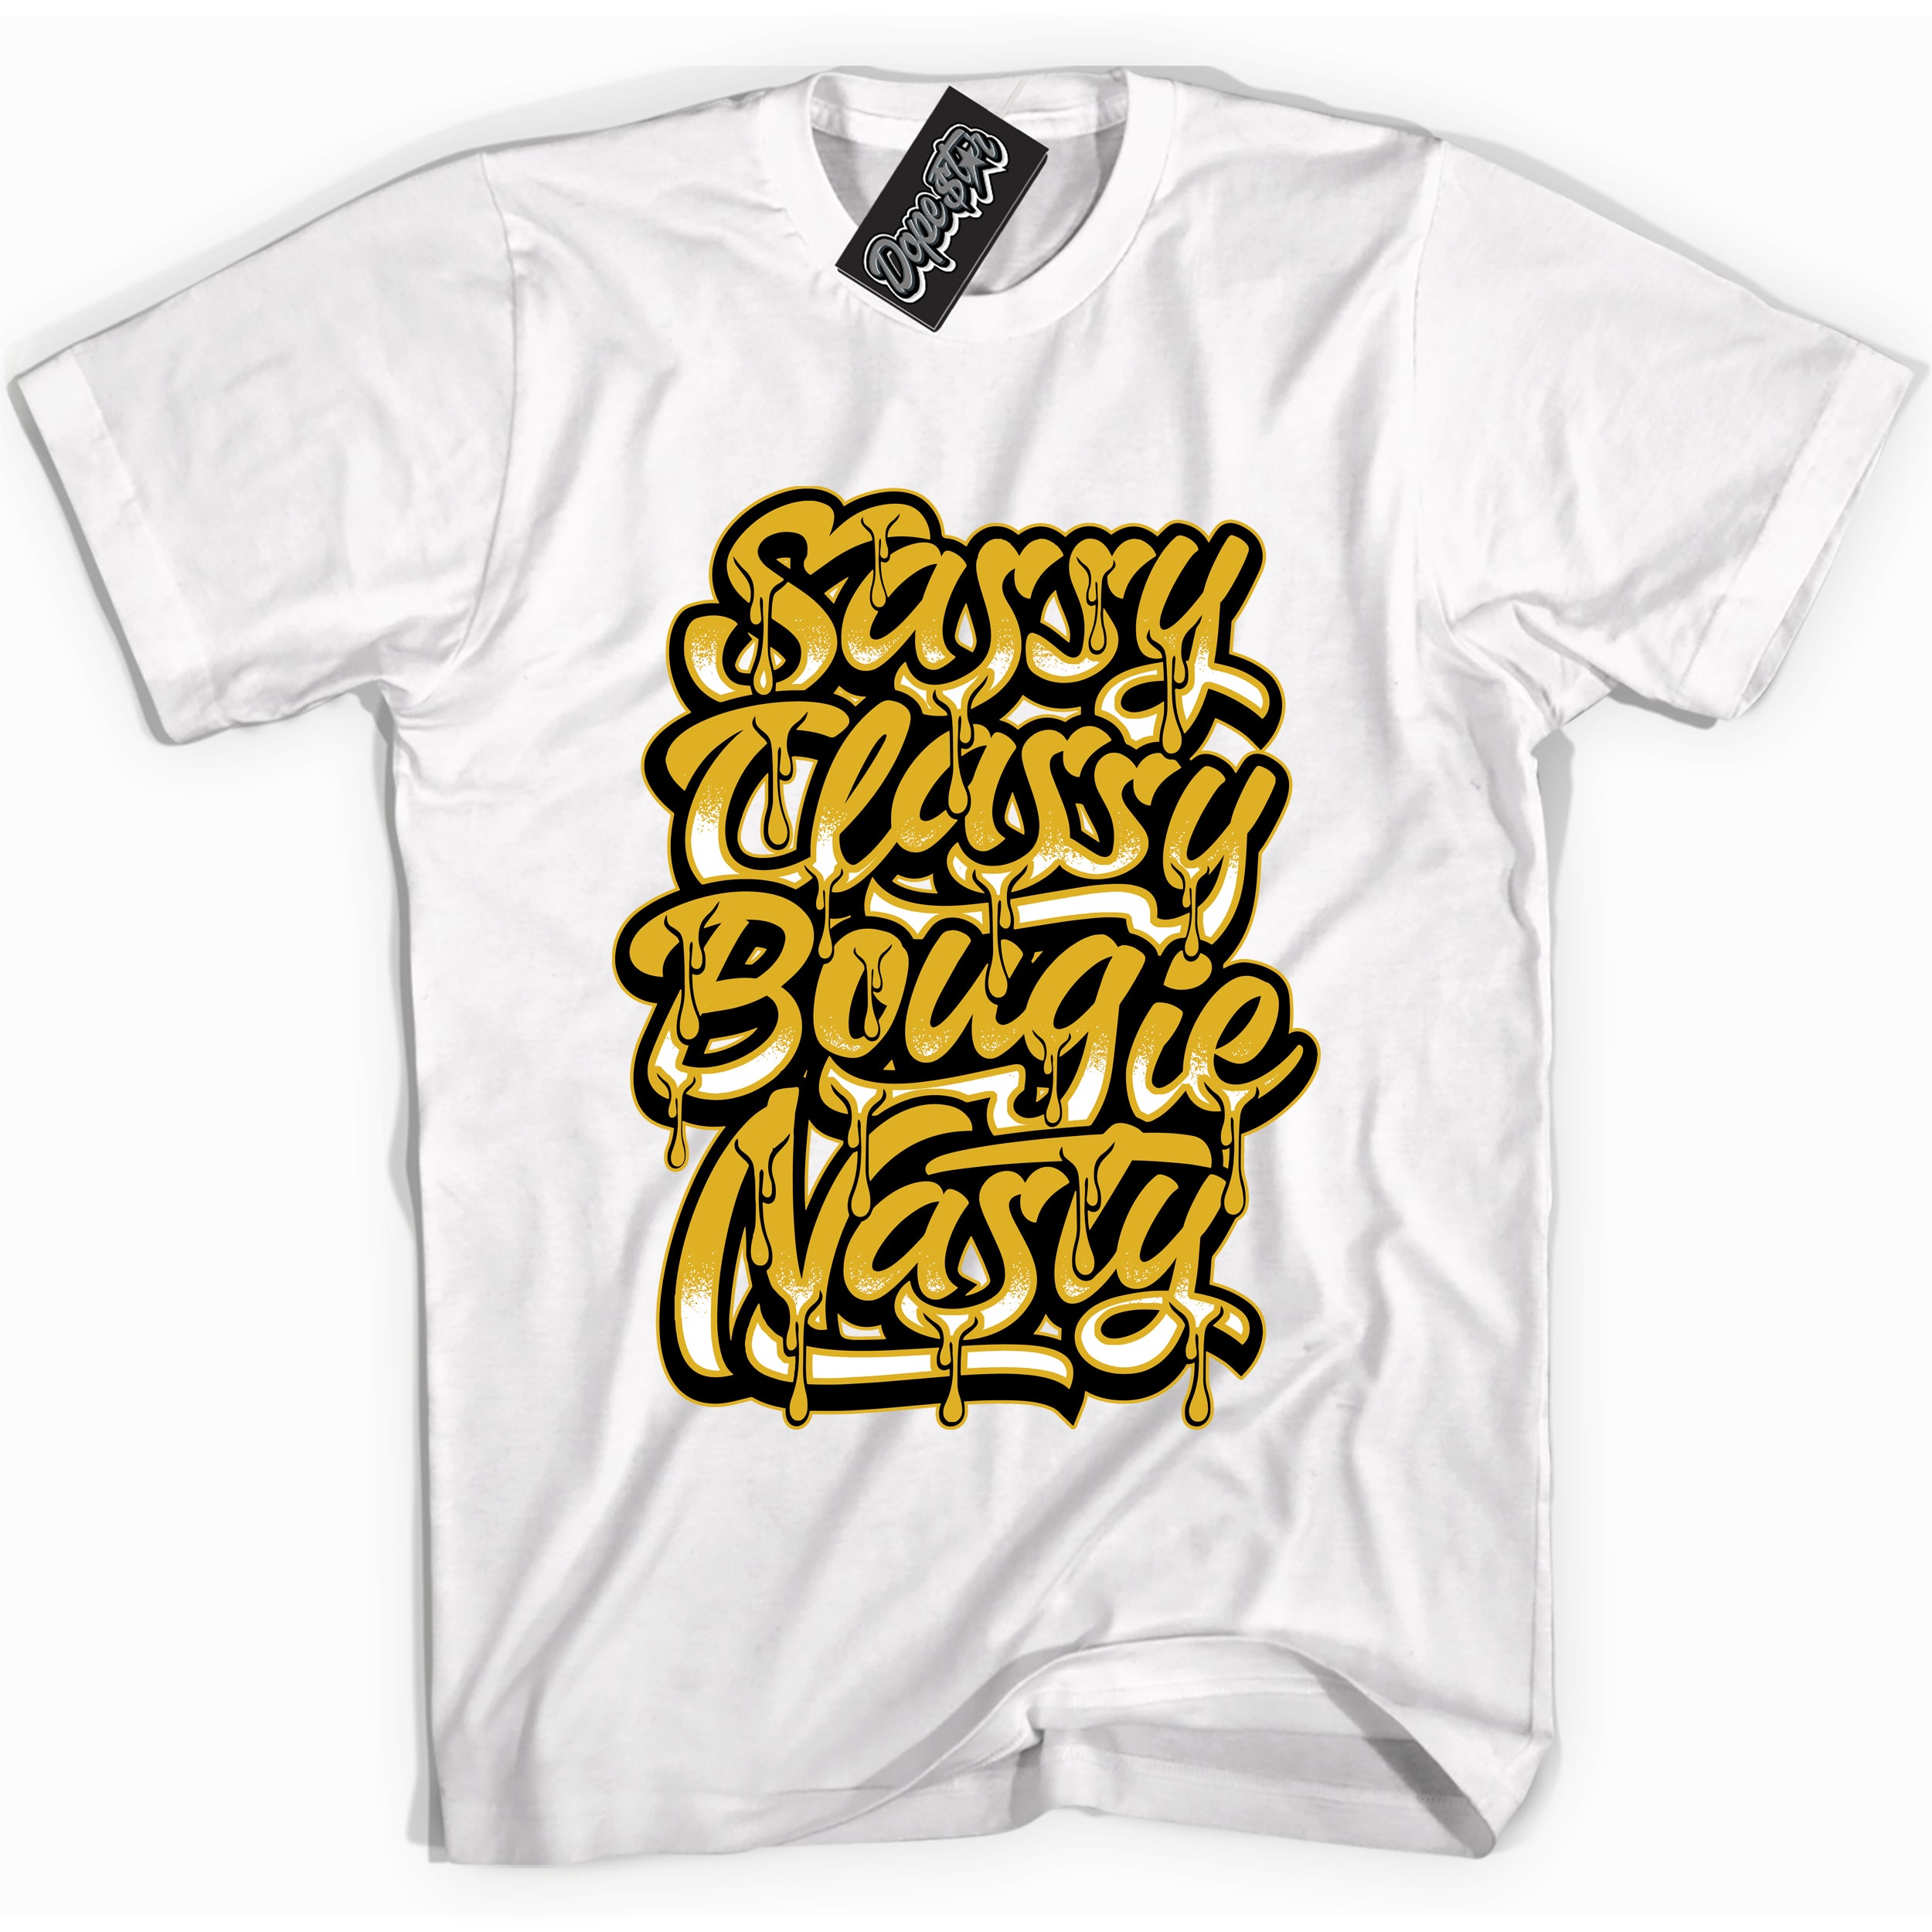 Cool White Shirt with “ Sassy Classy” design that perfectly matches Yellow Ochre 6s Sneakers.